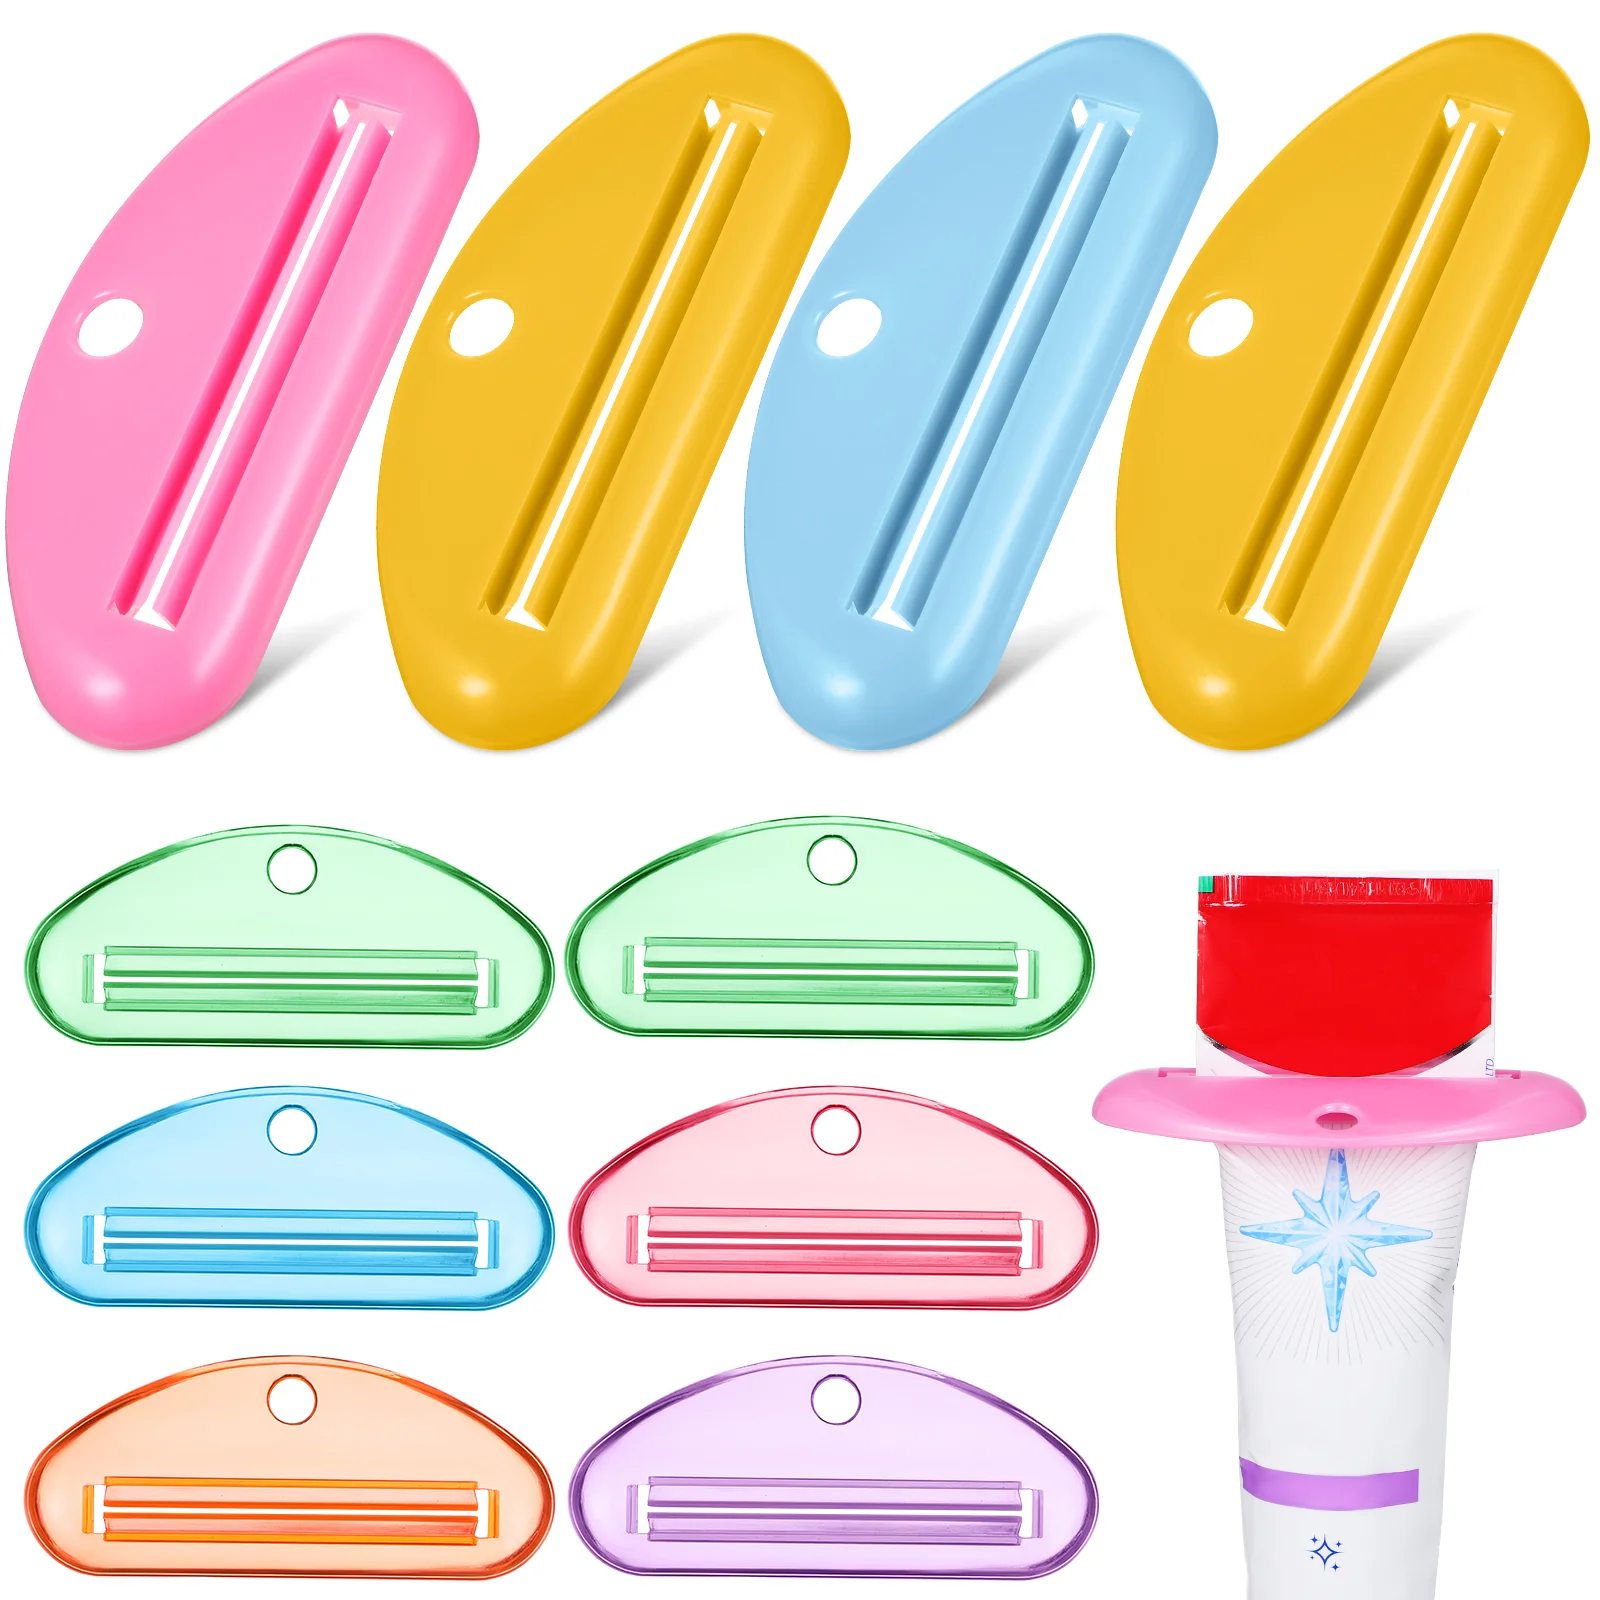 

10 Pcs Mixed Color Toothpaste Squeezer Rollers Squeezers Rolling Tube Tool Plastic Household